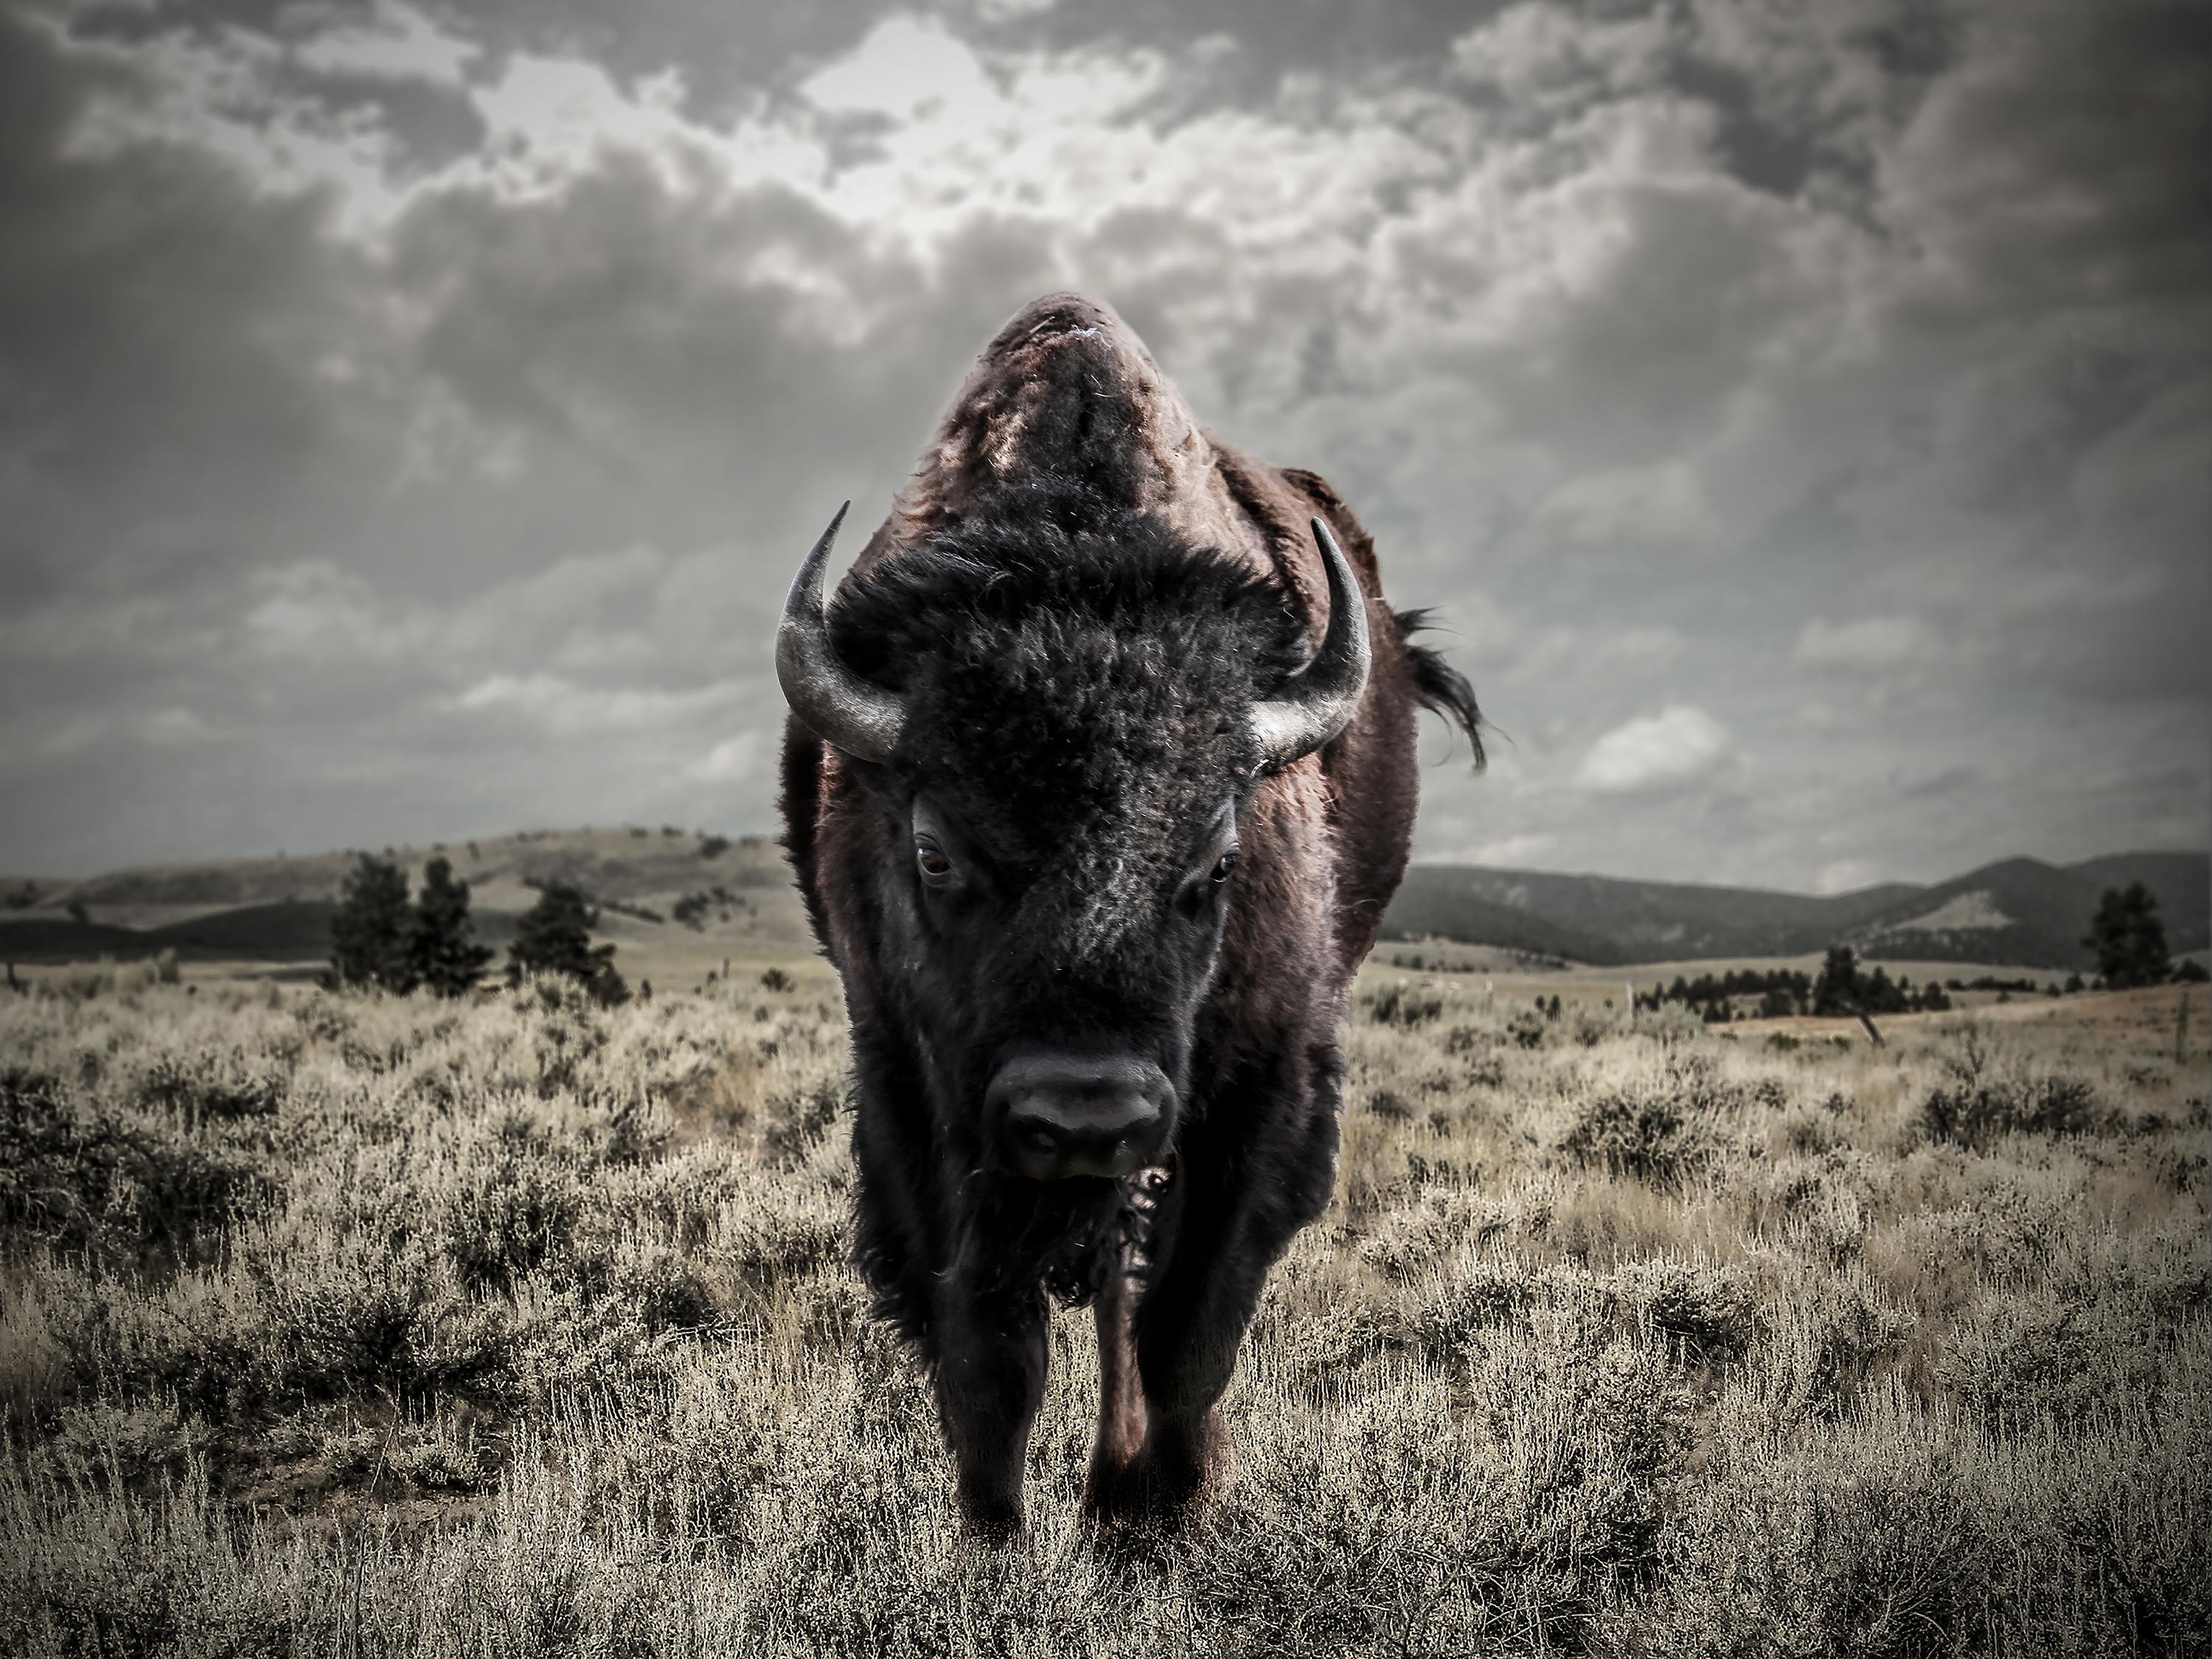 'Bison" Photograph of Bison 28x40 -  Photography Unsigned Print Buffalo